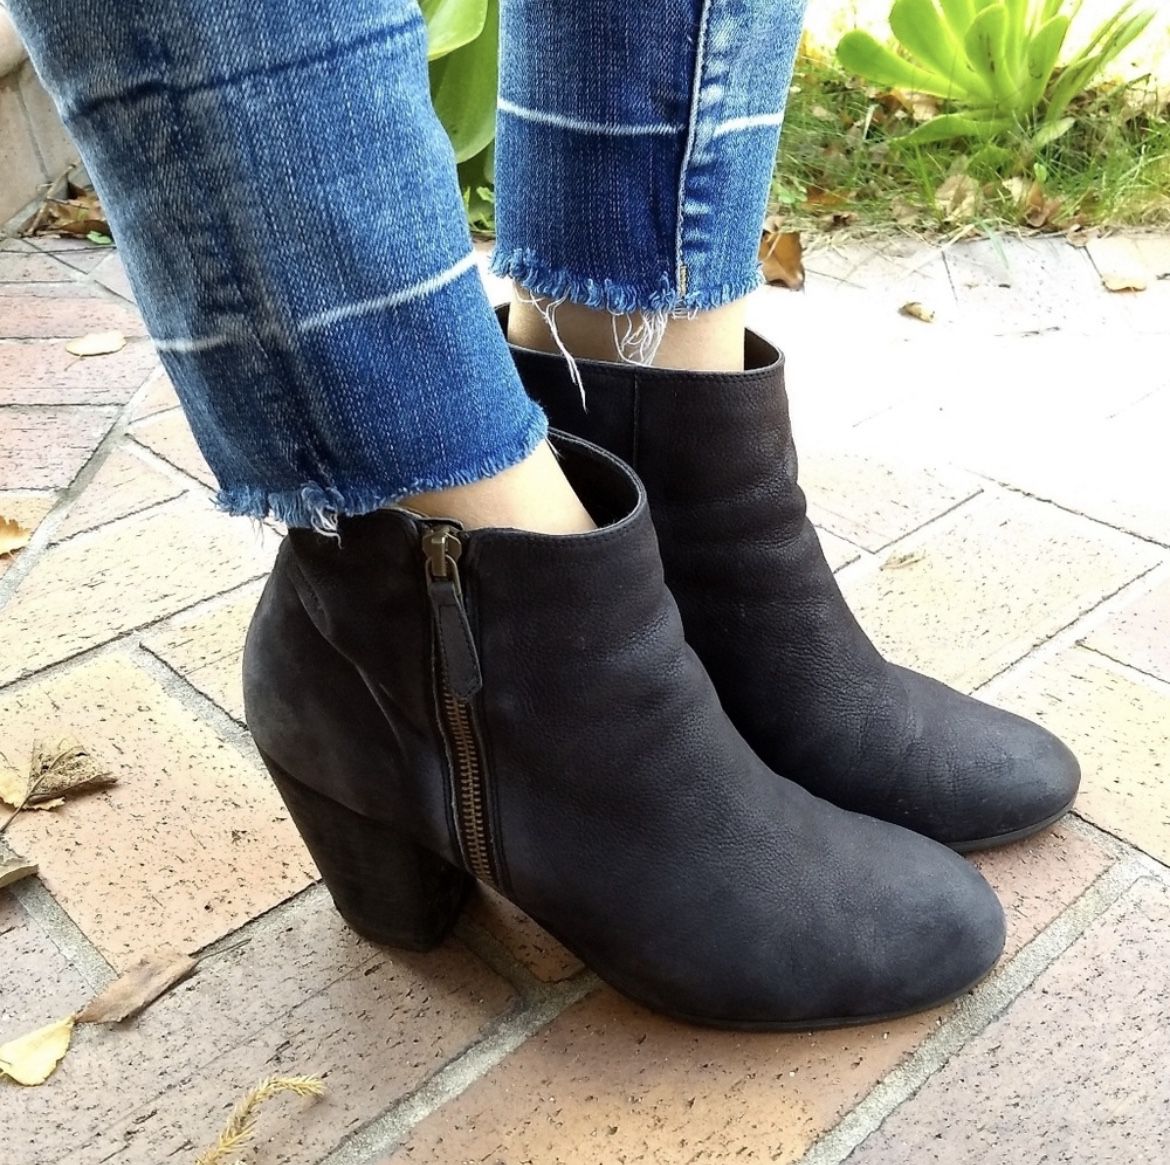 BP Nordstrom Trolley Black Ankle Boots 10 Stacked Heel